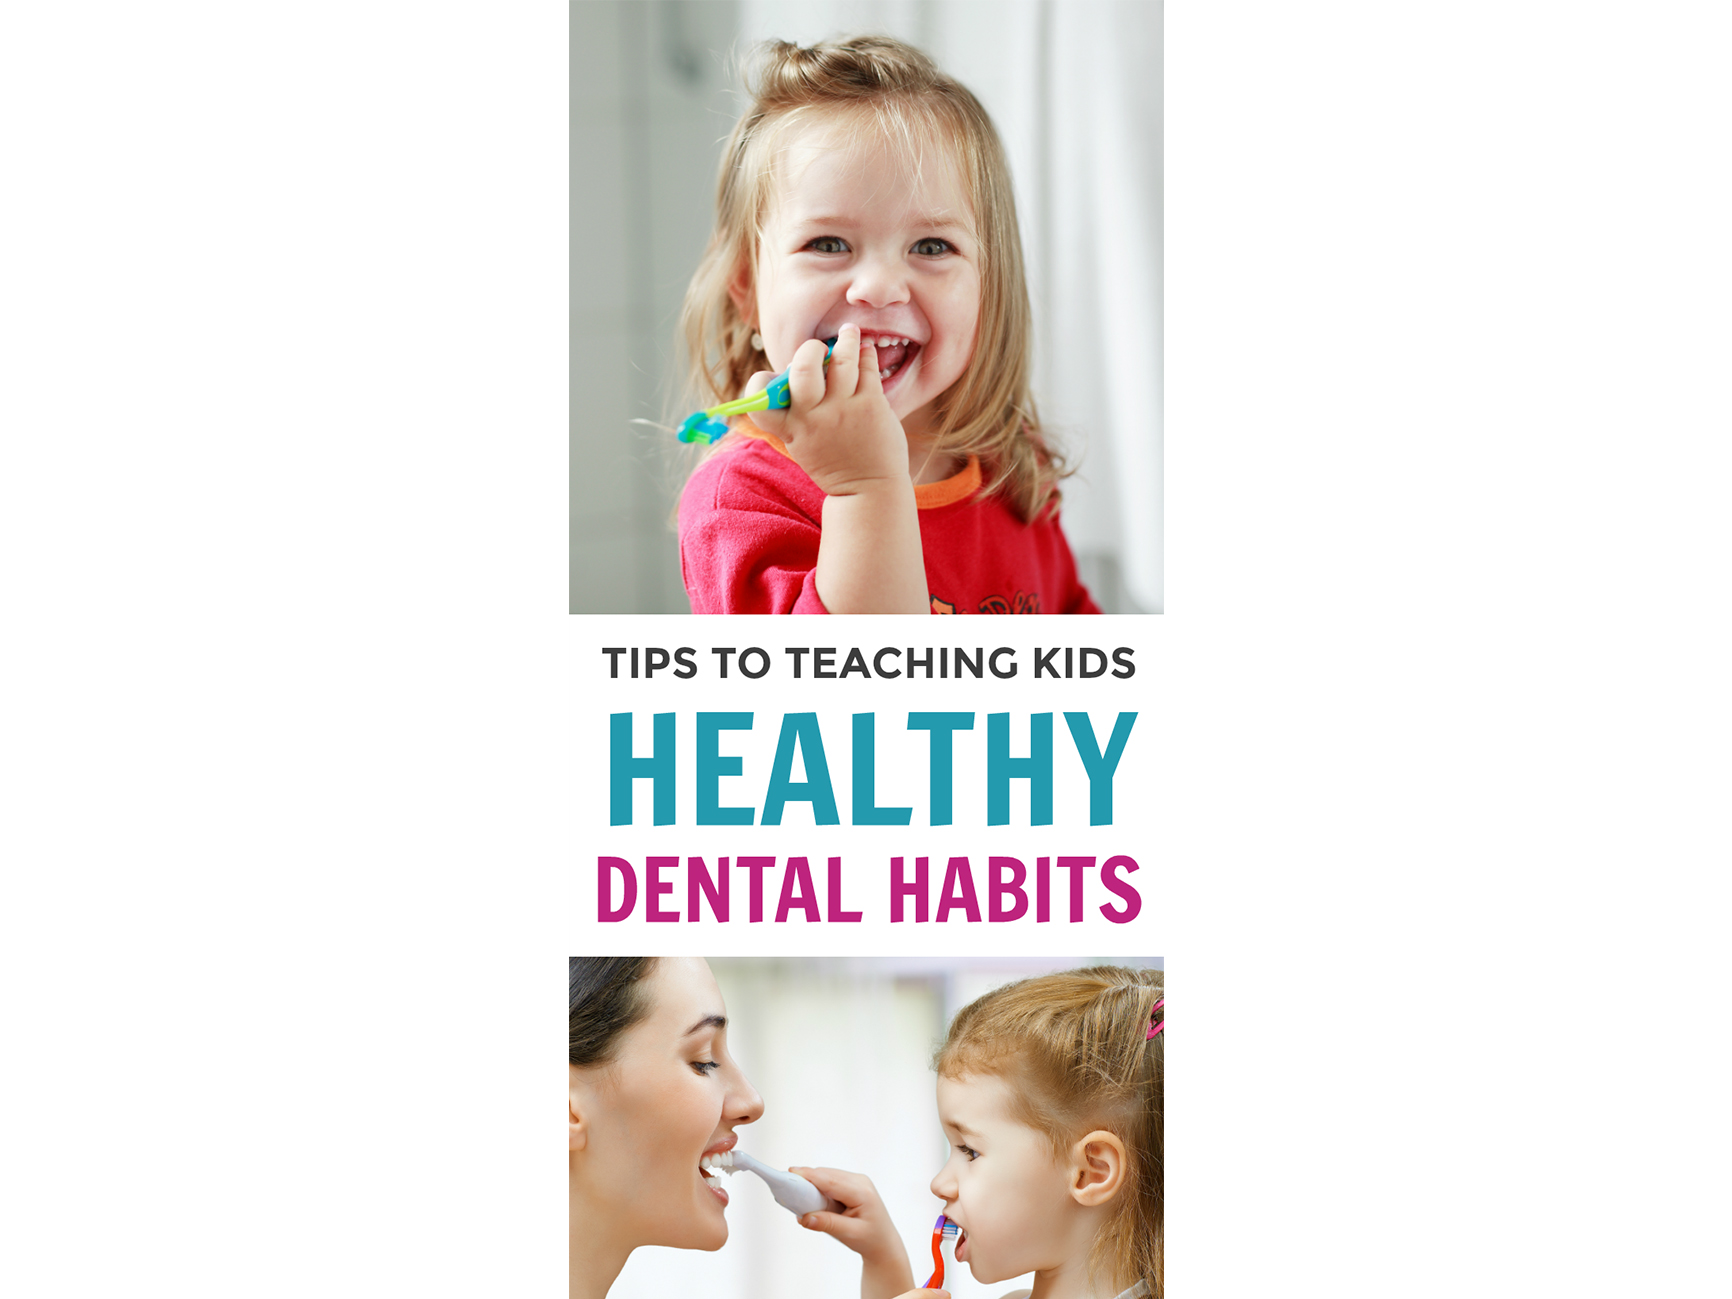 Make Oral Health a Priority for Kids